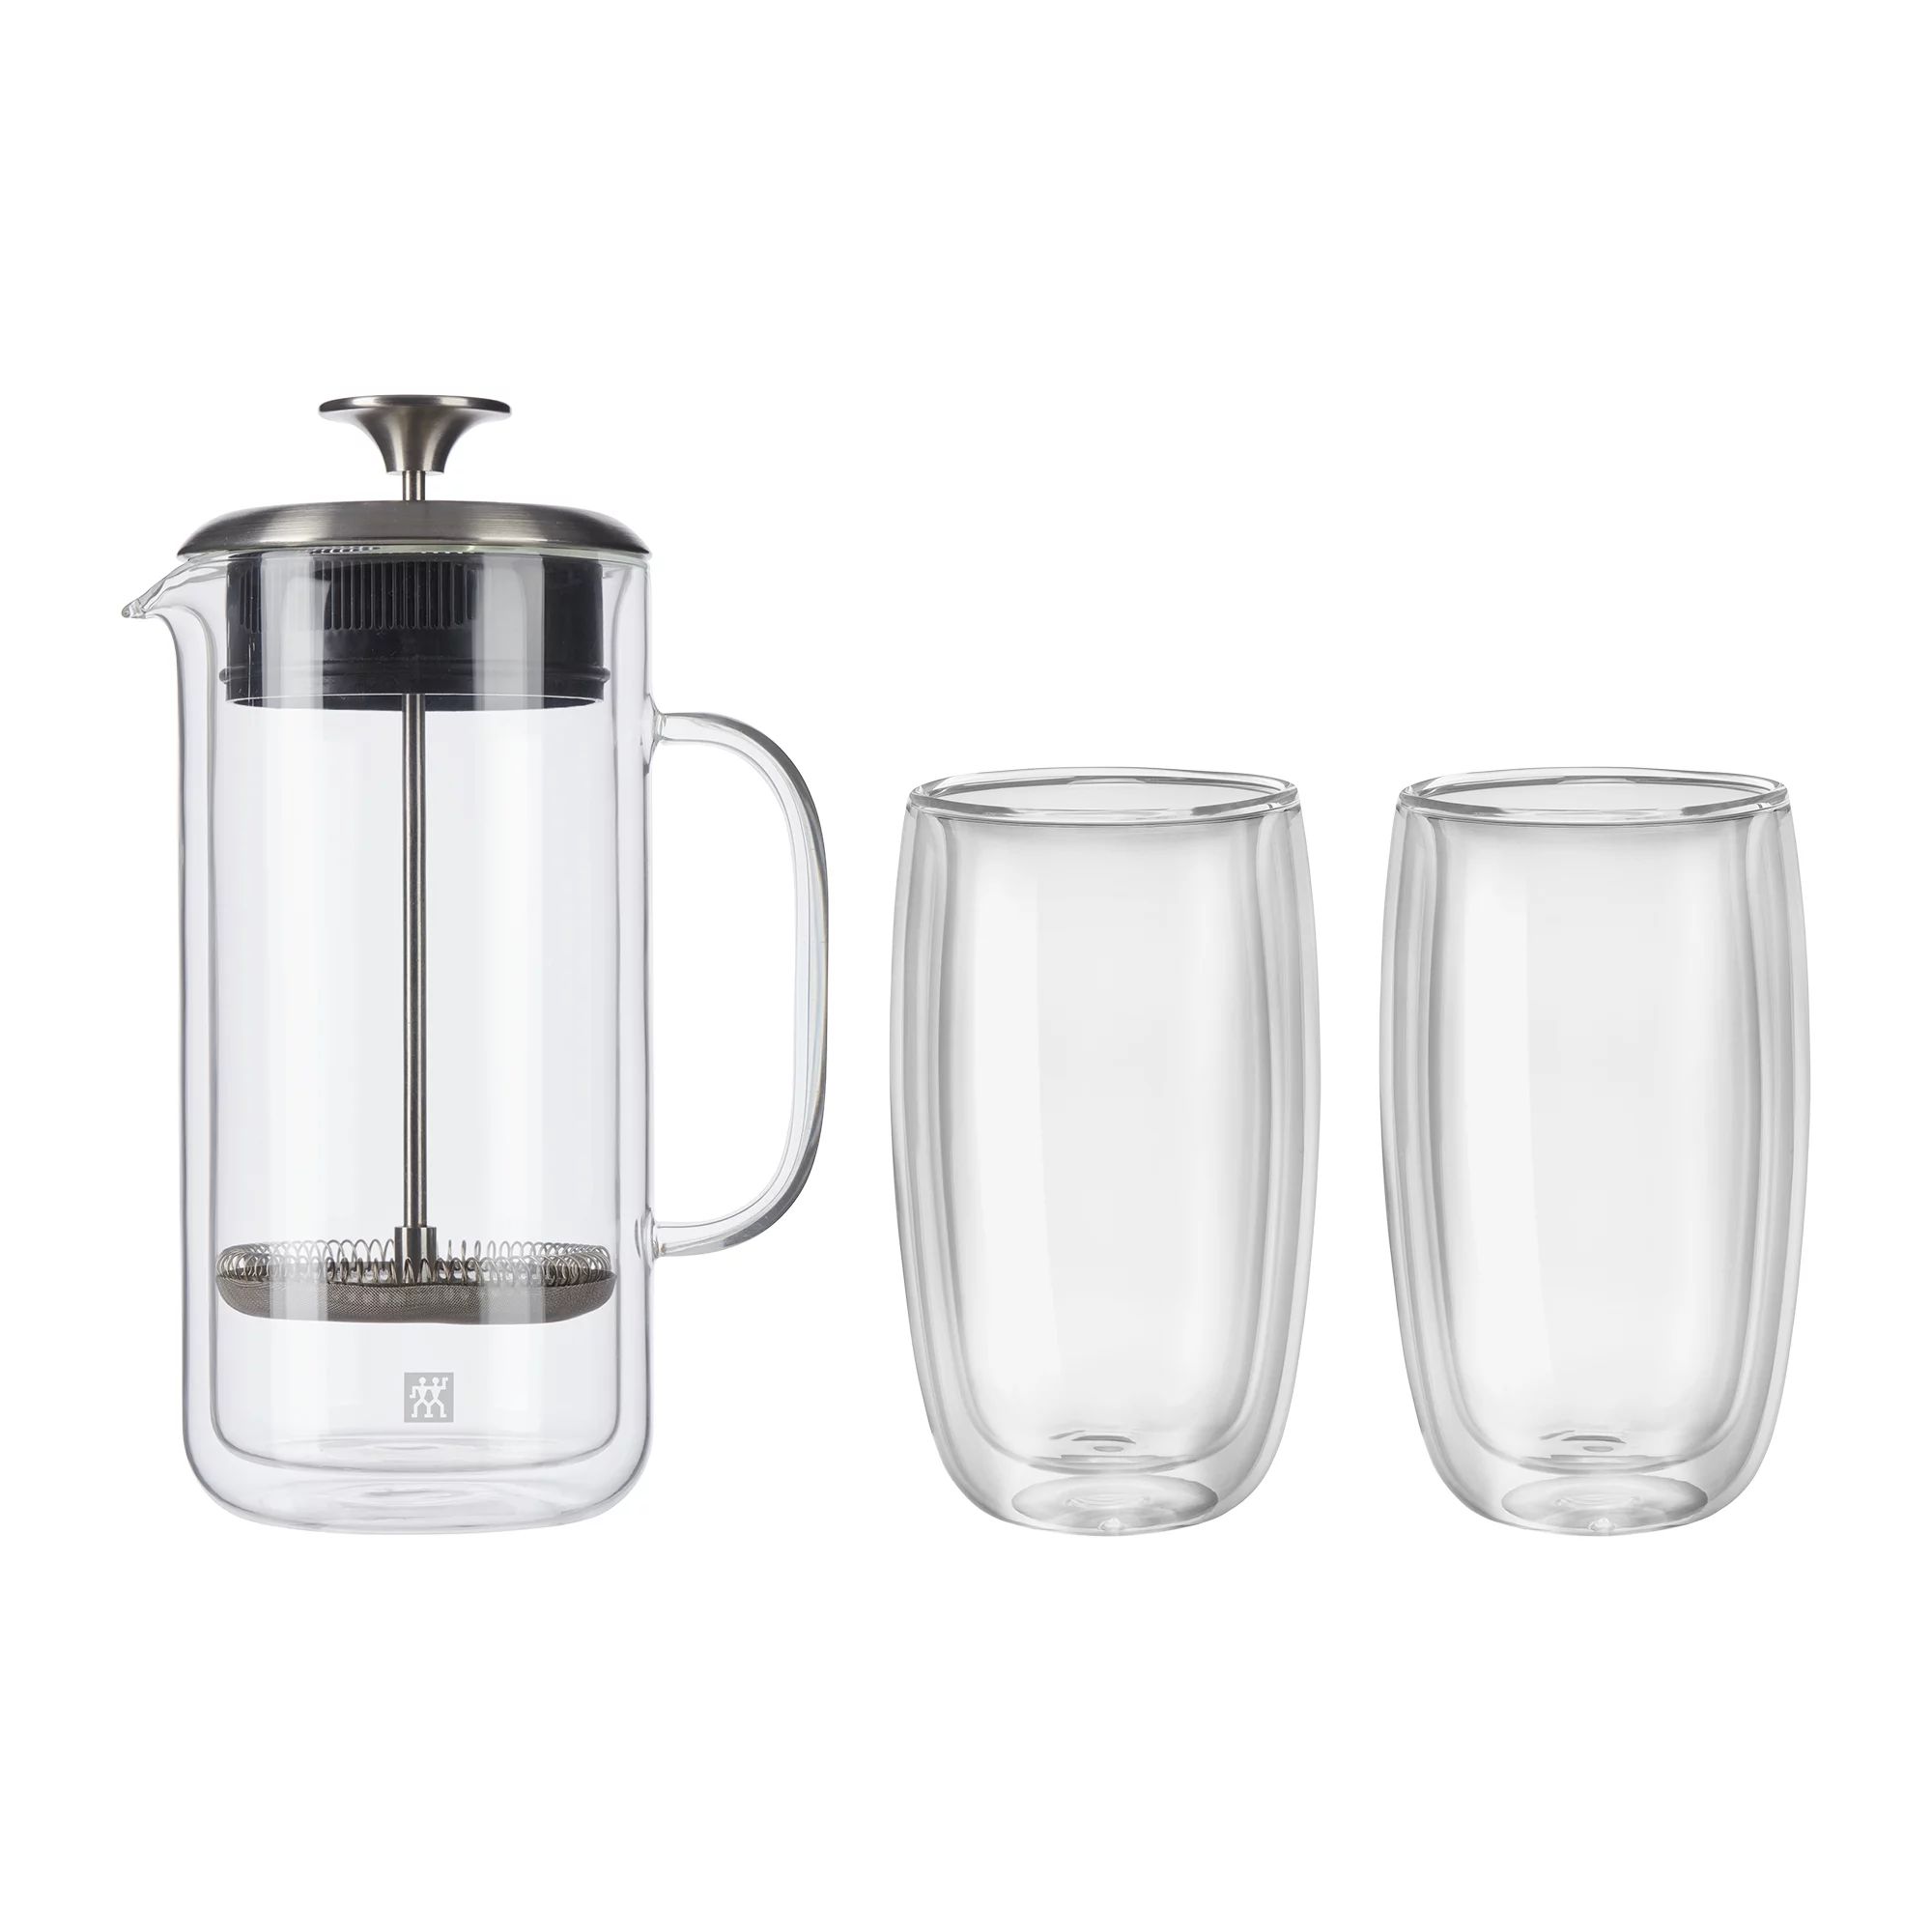 ZWILLING Sorrento Double Wall French Press and Latte Glass | Walmart (US)